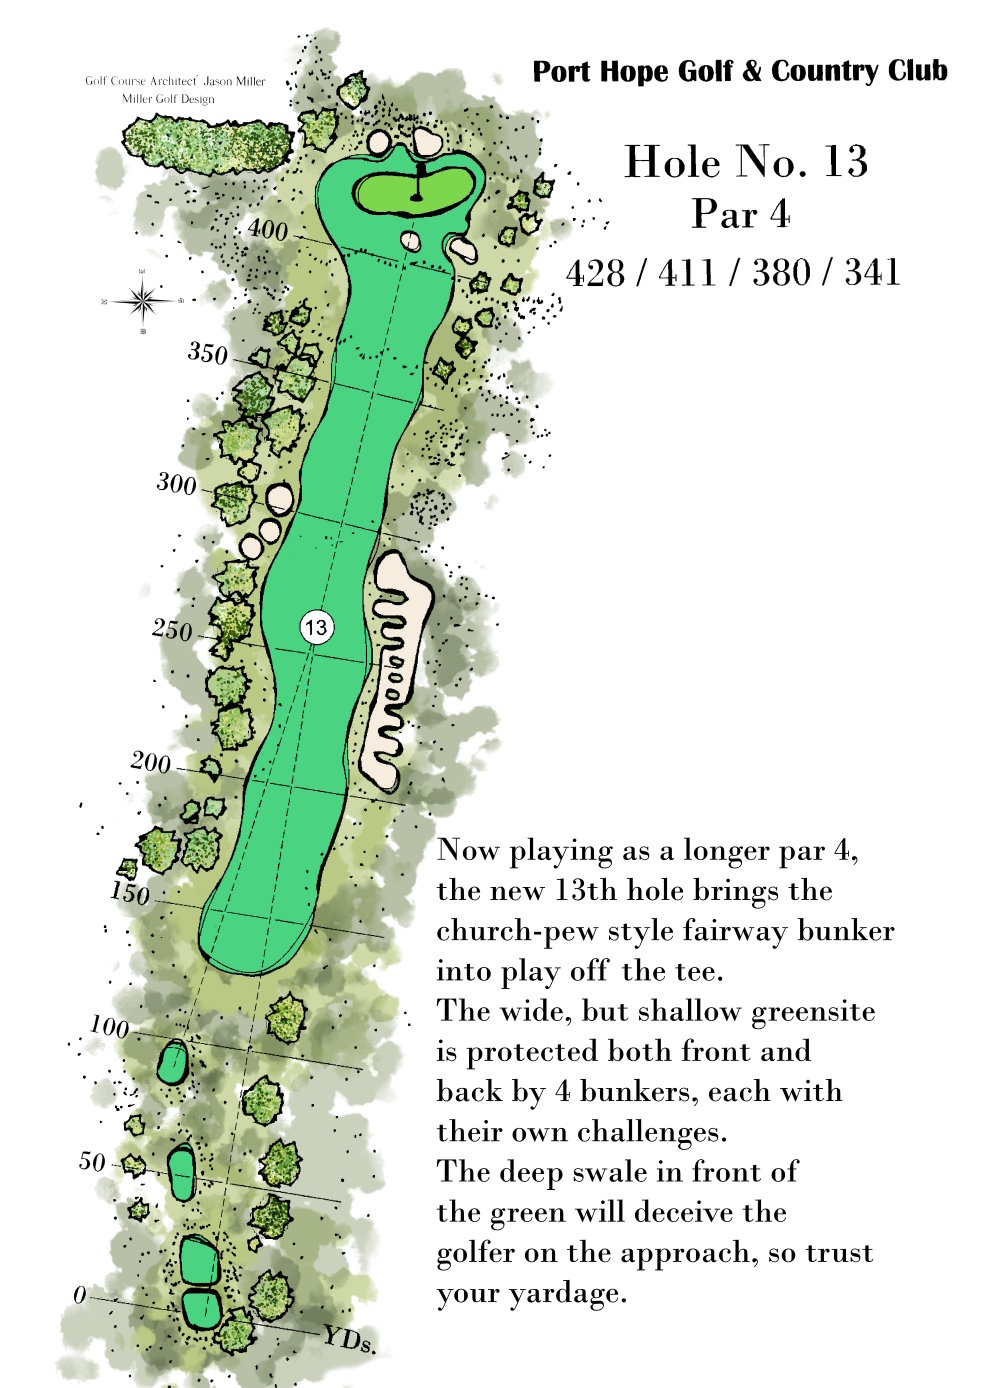 Rendering of Hole 13